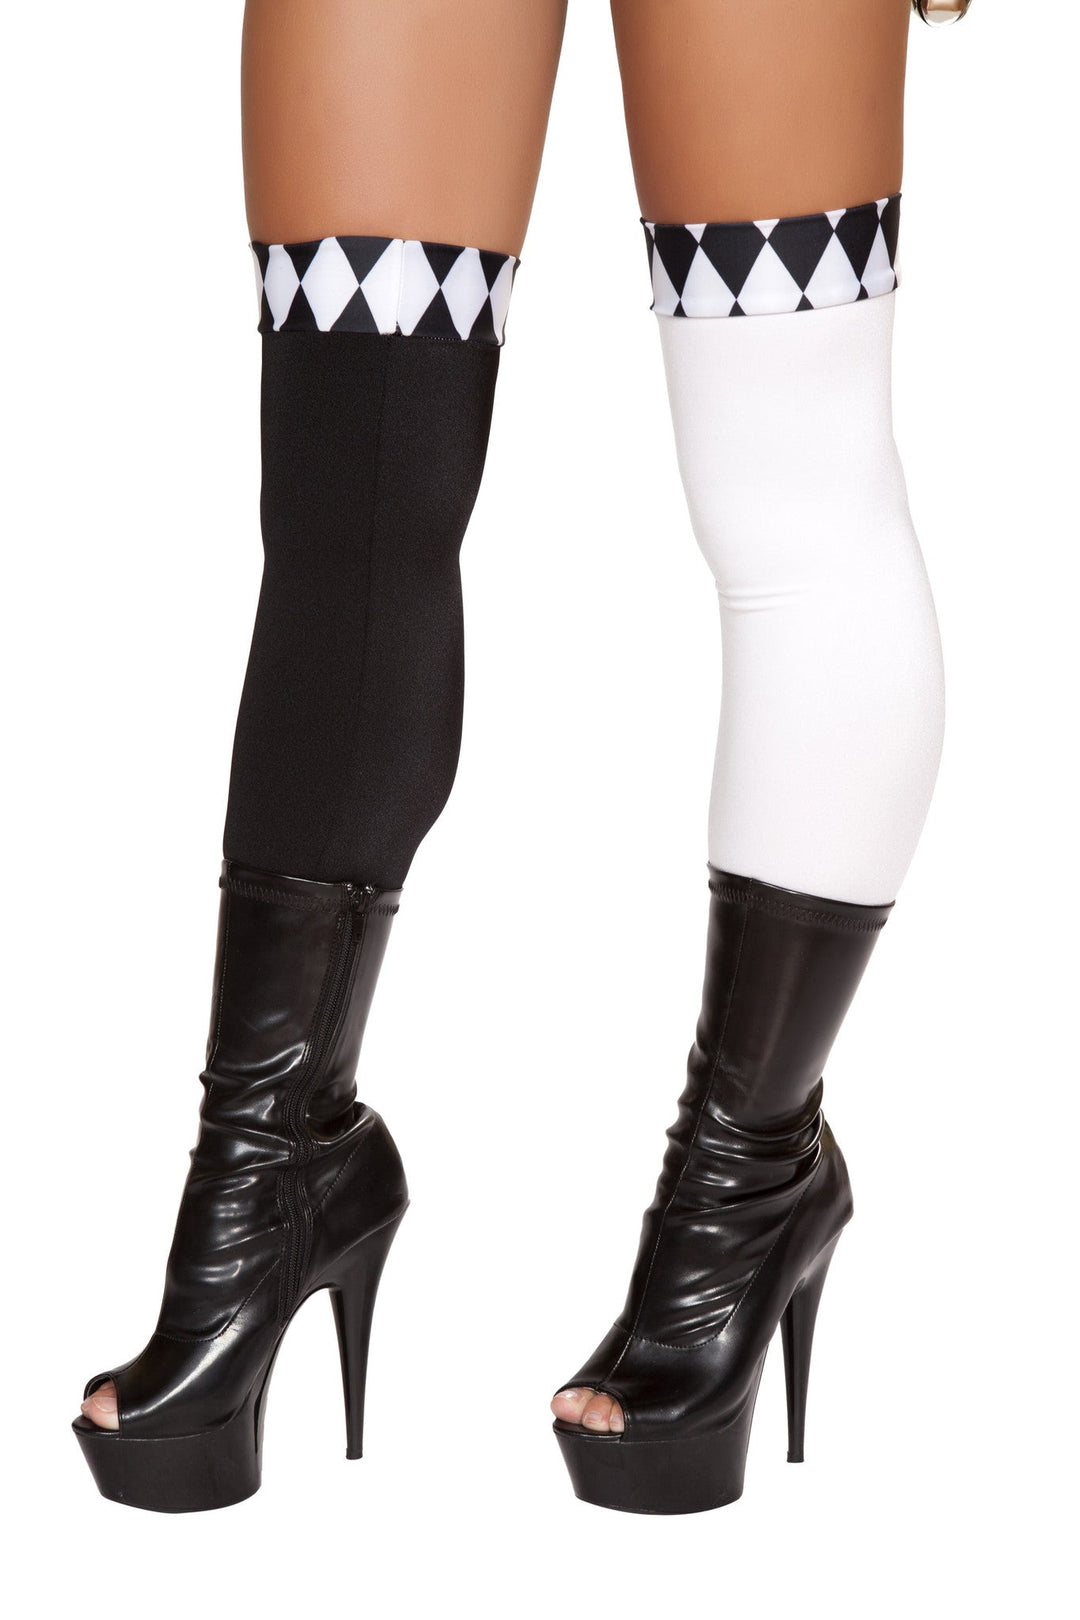 Wicked Black and White Jester Stockings